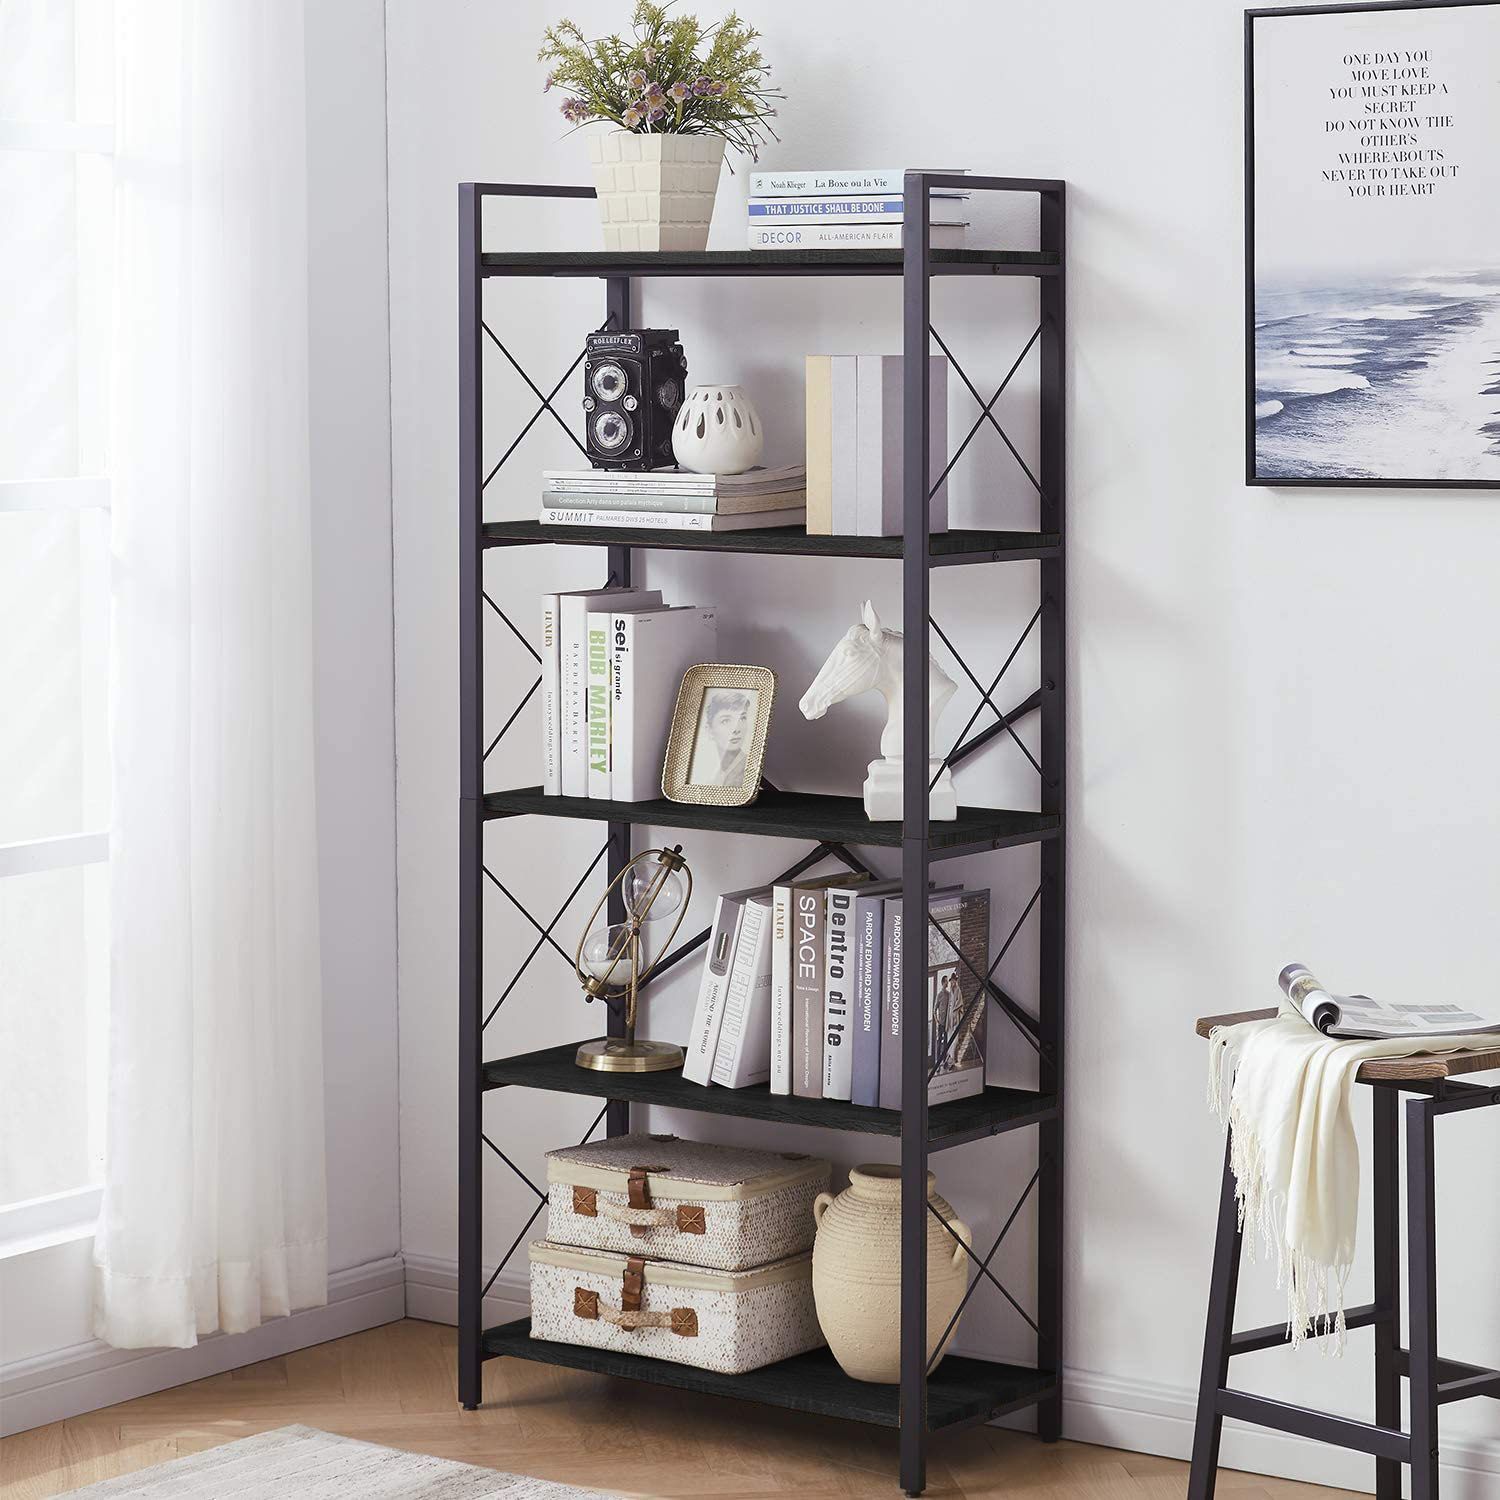 Home Gallery | London Modern Metal Bookcase Throughout X Frame Metal Bookcases (View 14 of 15)